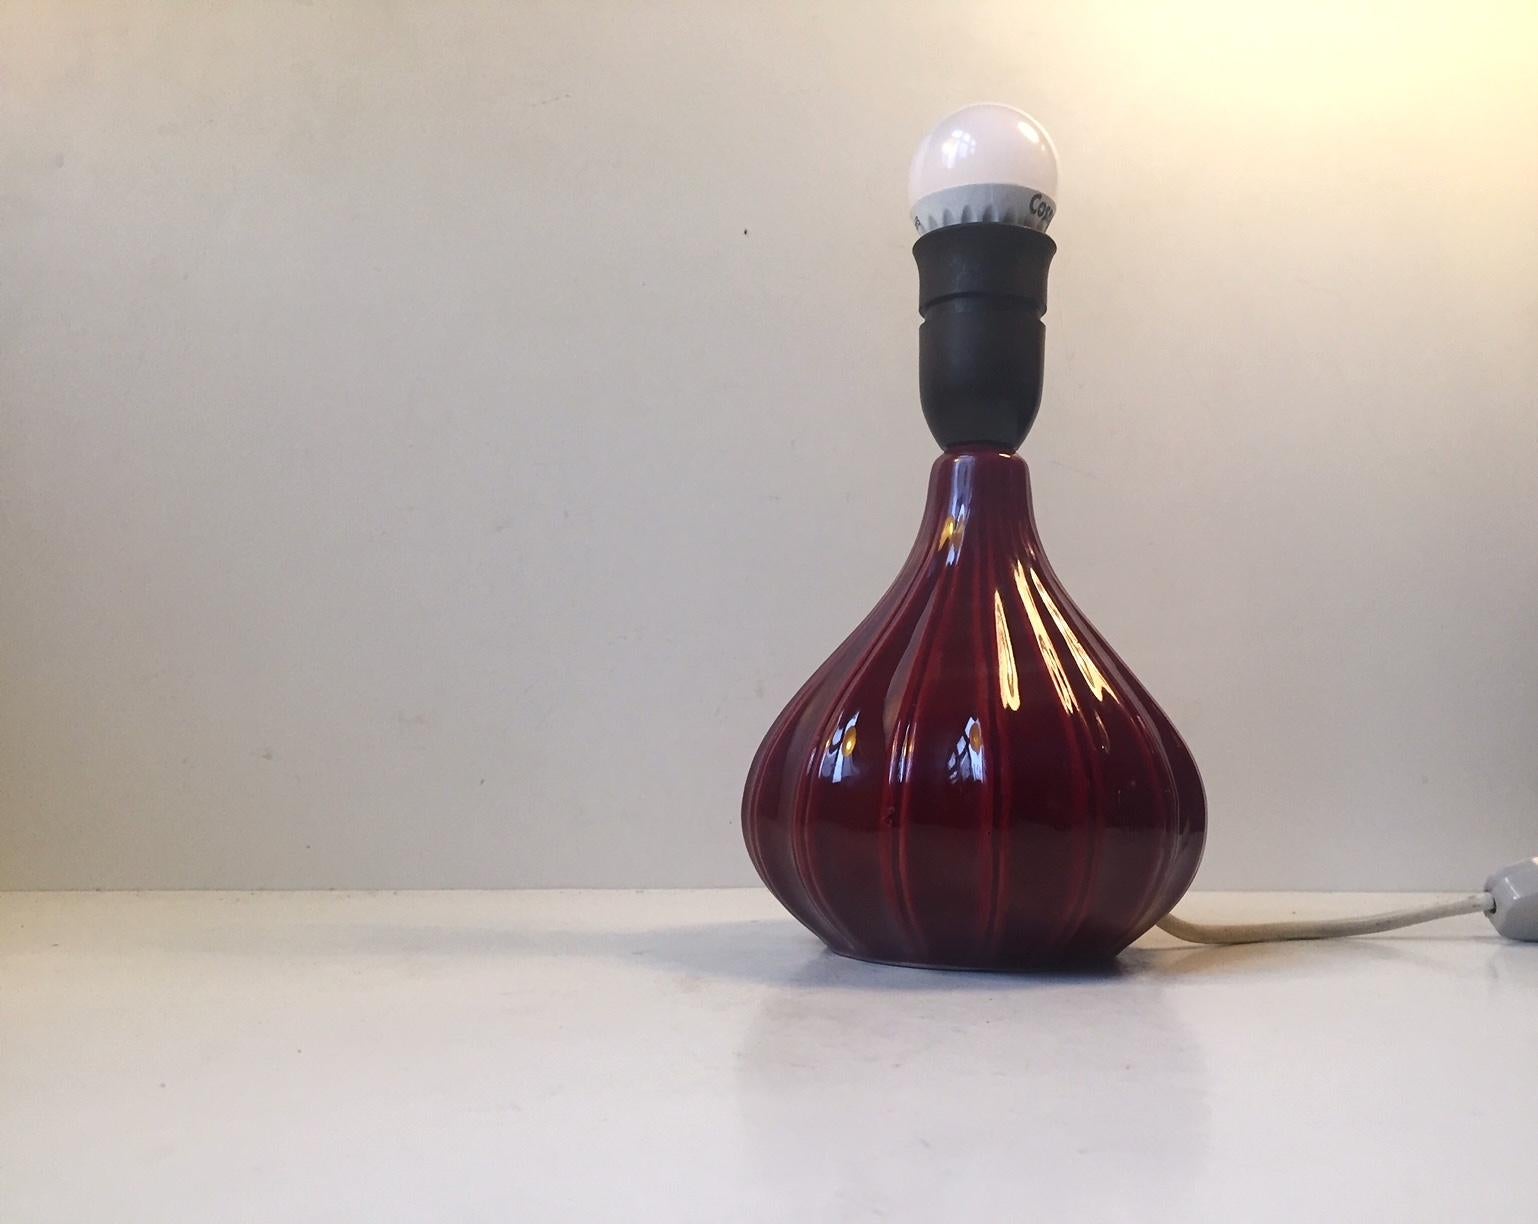 Small fluted pumpkin table lampe in pottery and a shiny monochrome maroon glaze. Designed by Esben & Lauge for their company Eslau in Denmark during the 1960s. This color glaze is the rarest. This light is sold without the shade. Please personalize